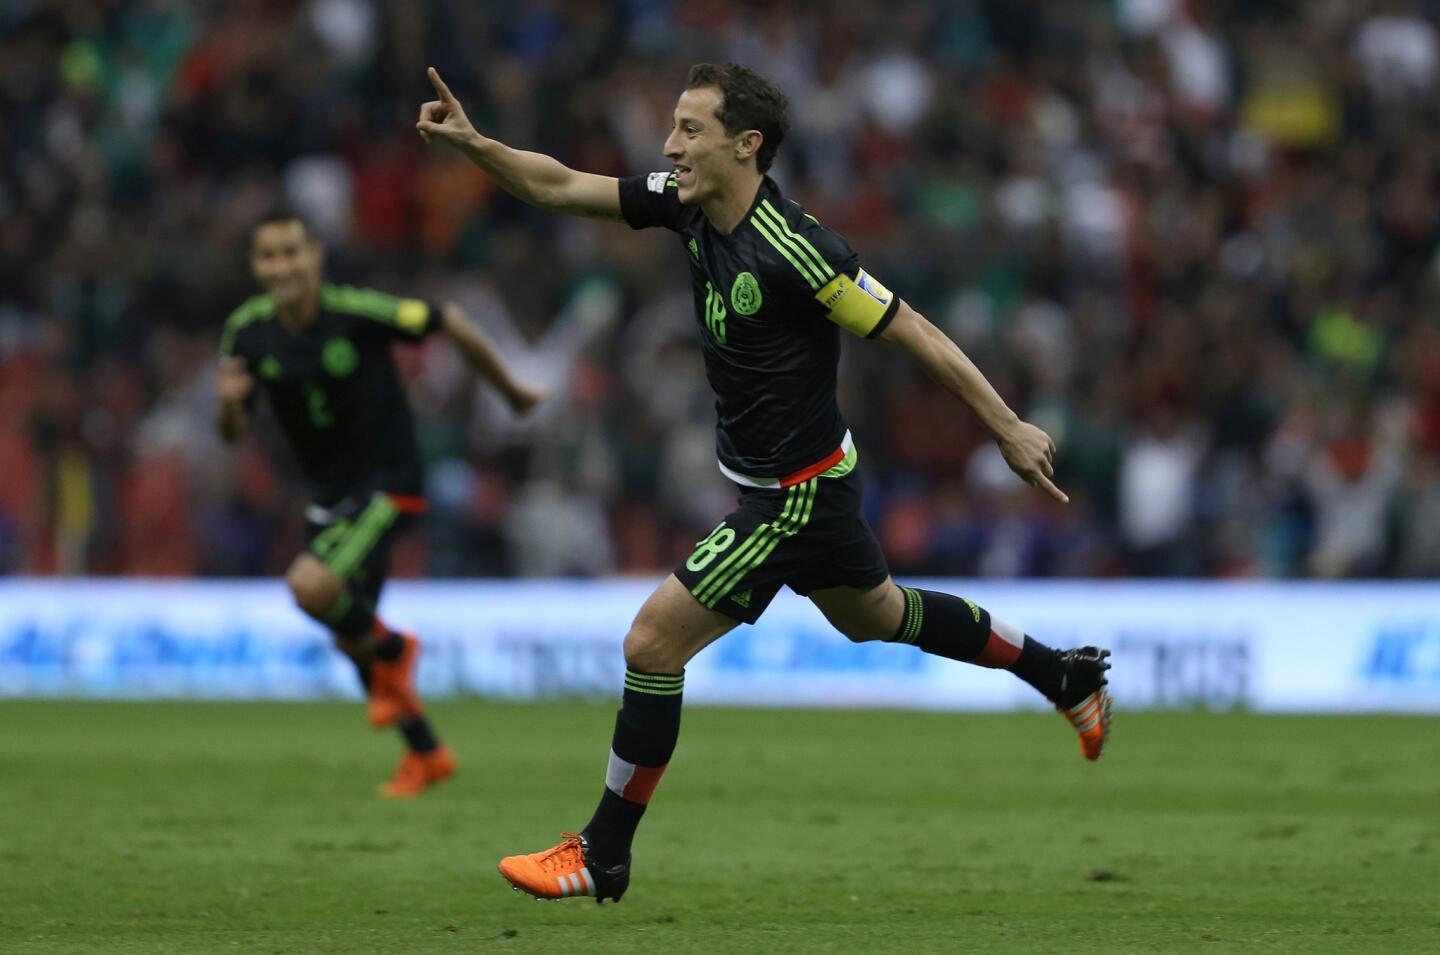 Mexico's Andres Guardado celebrates after scoring against El Salvador during a 2018 World Cup qualifying soccer match in Mexico City, Friday, Nov. 13, 2015.